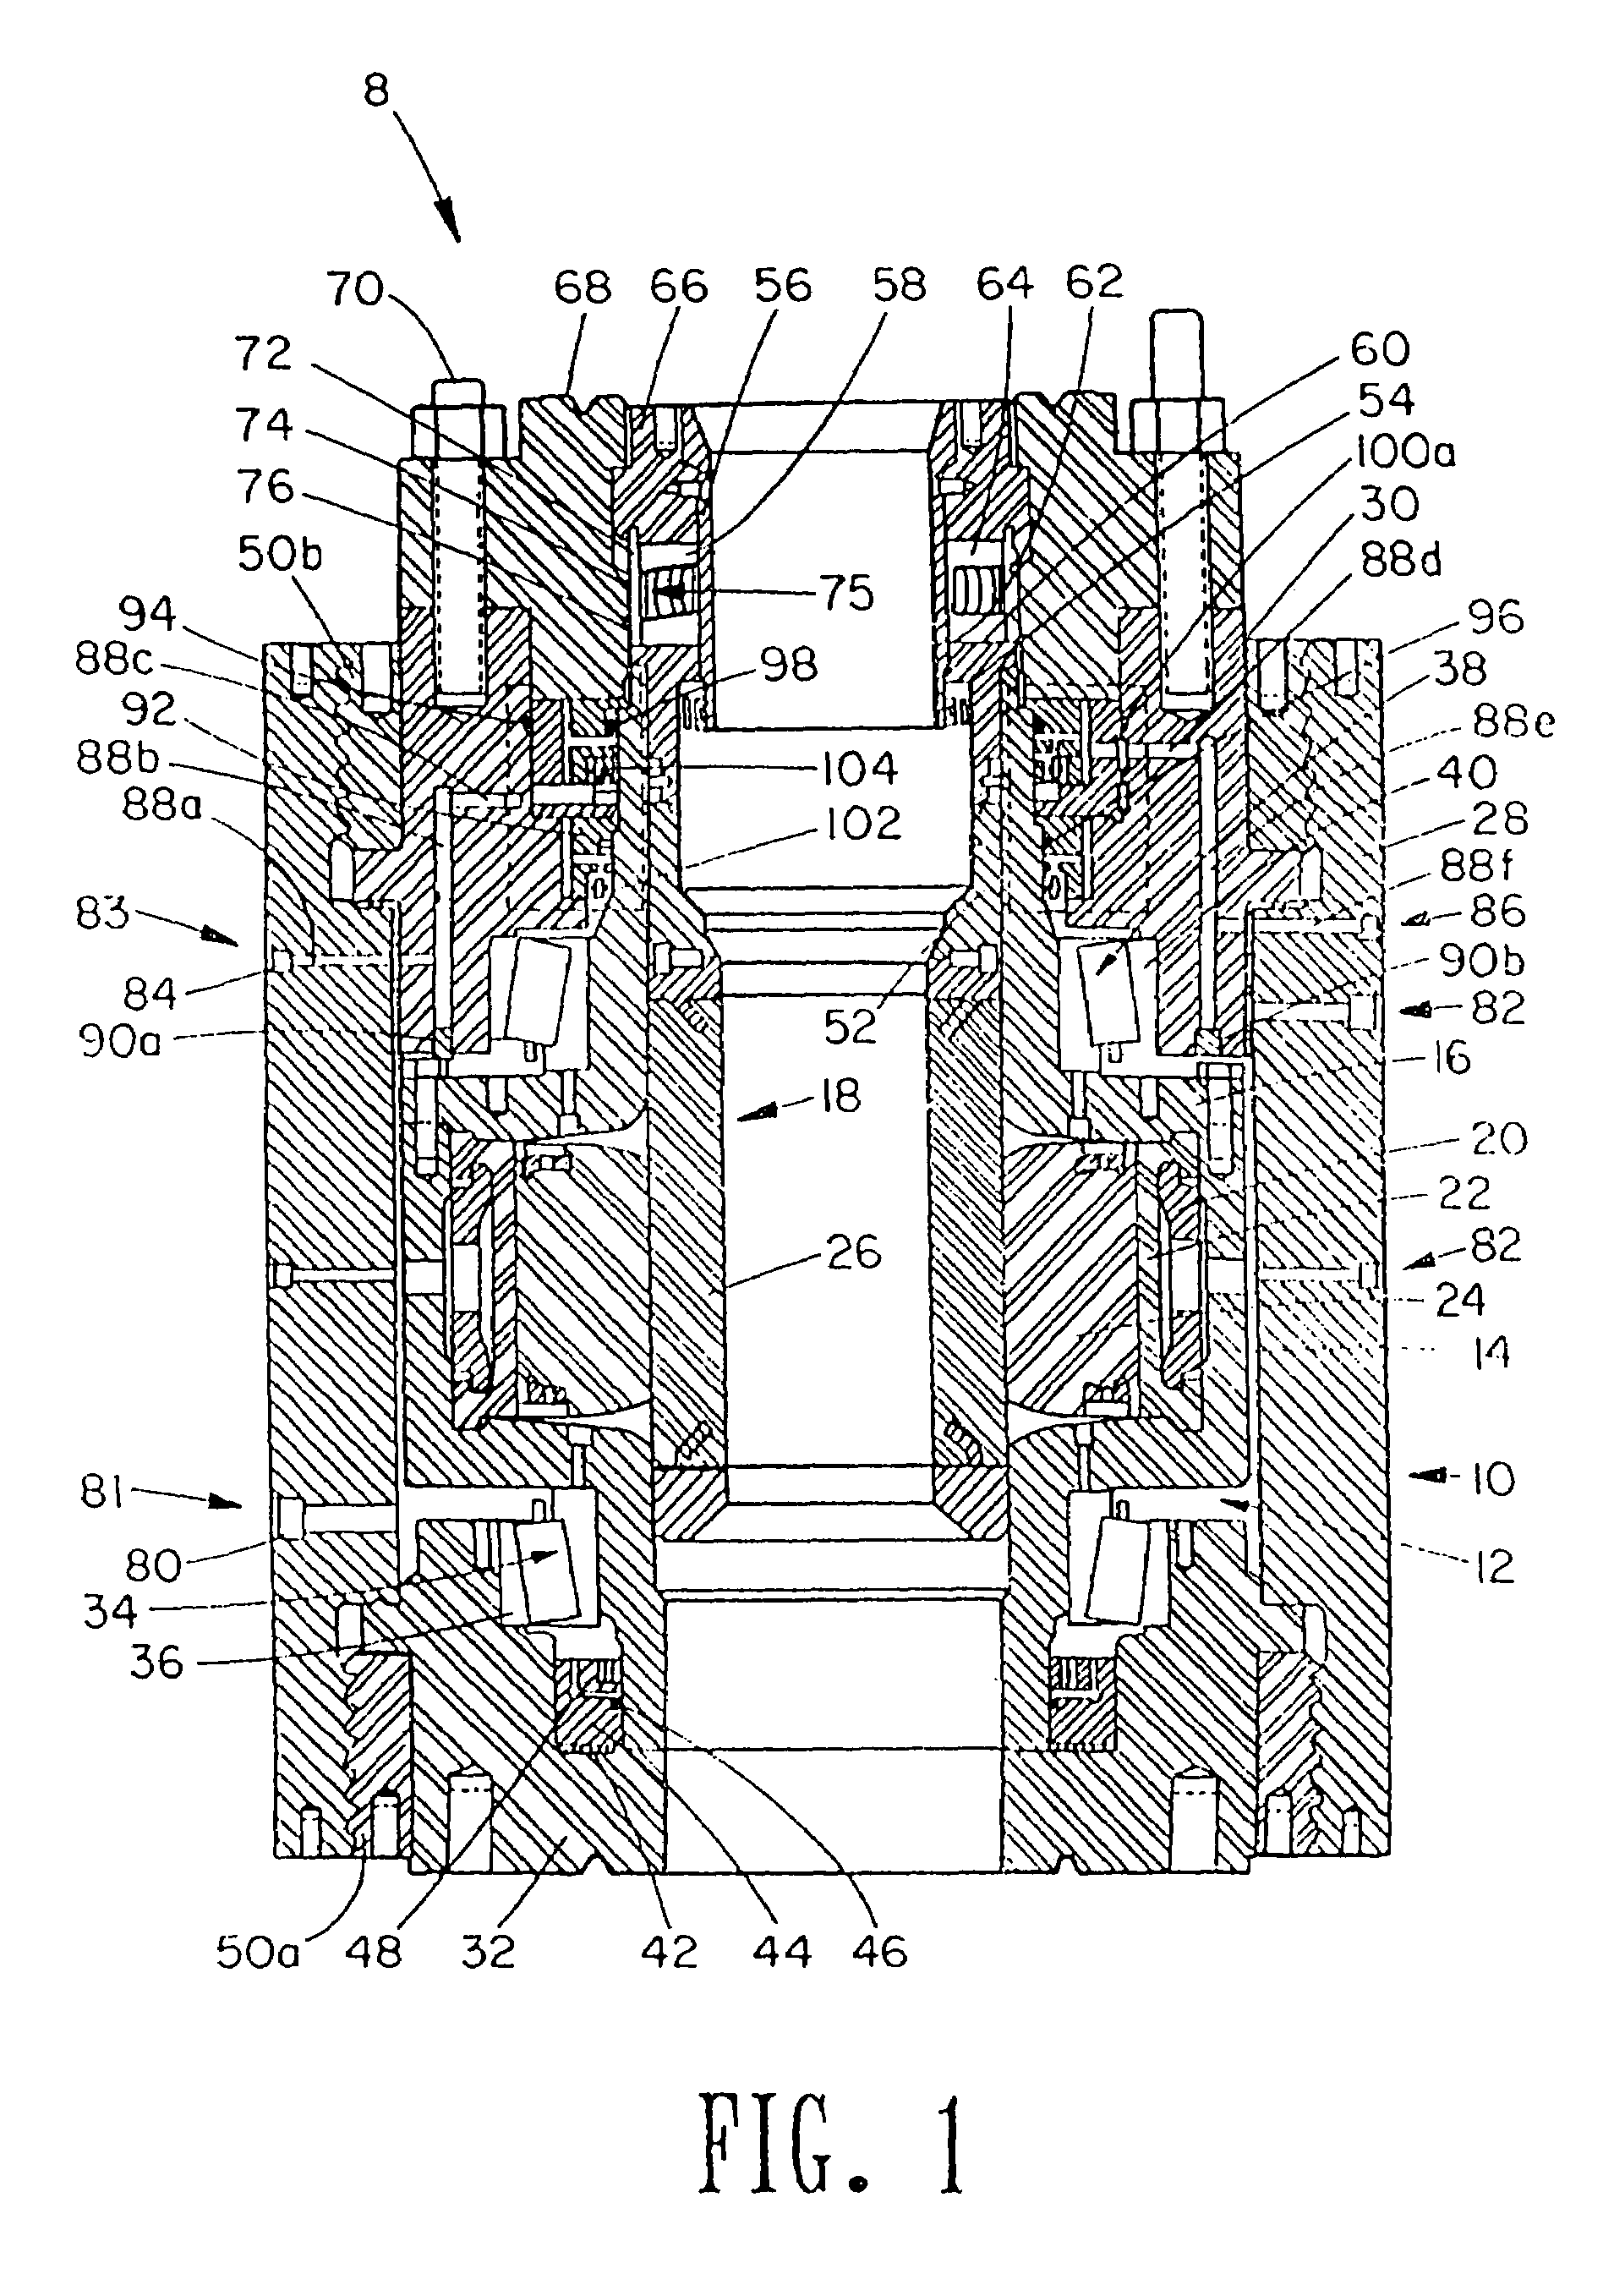 Rotating blowout preventer with independent cooling circuits and thrust bearing